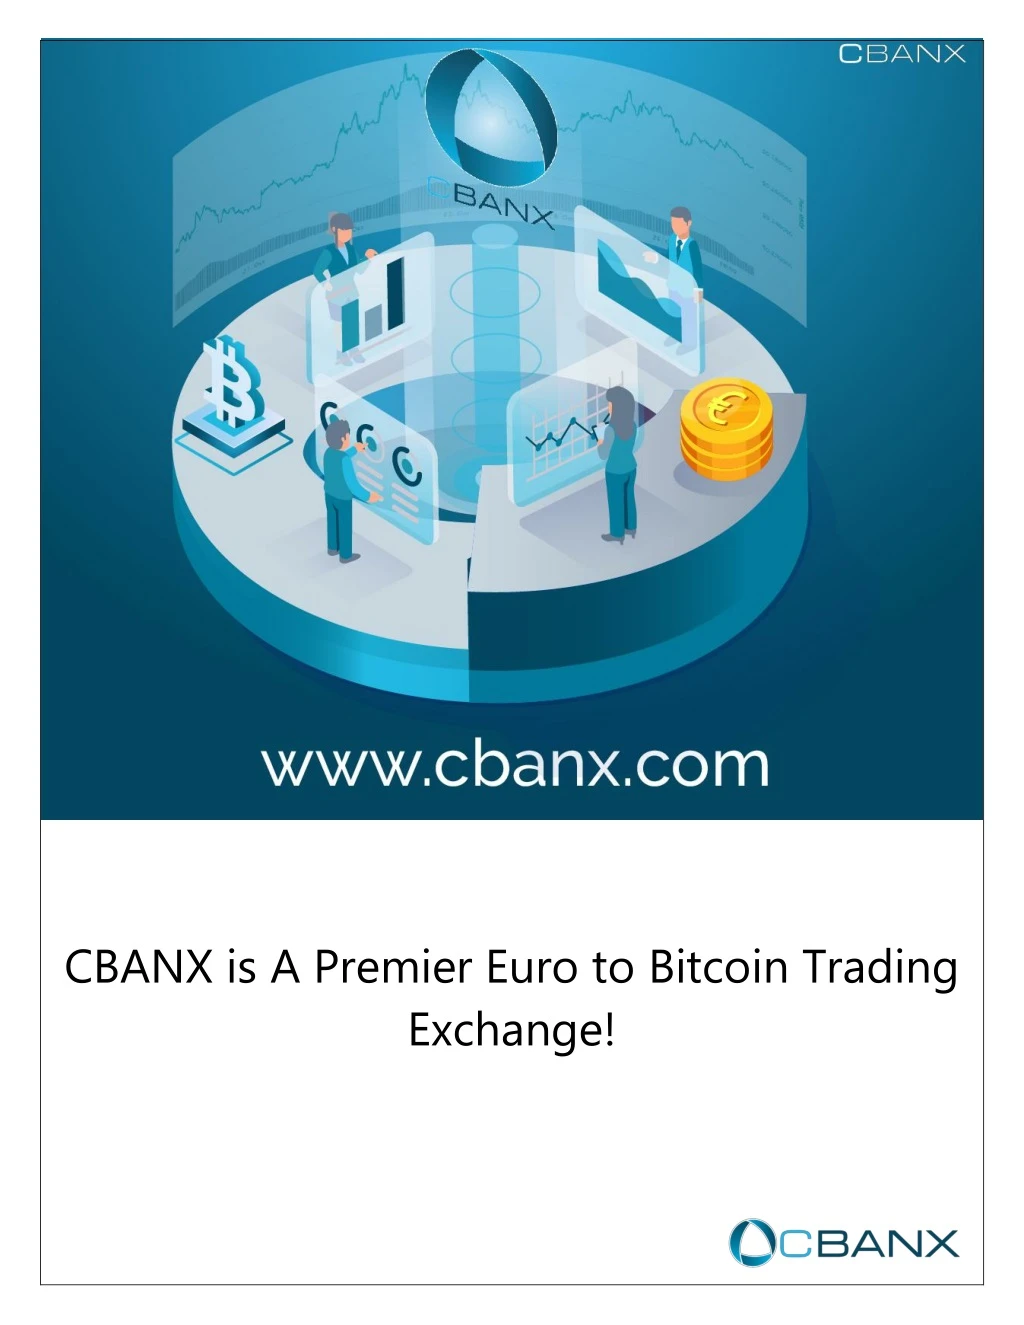 cbanx is a premier euro to bitcoin trading